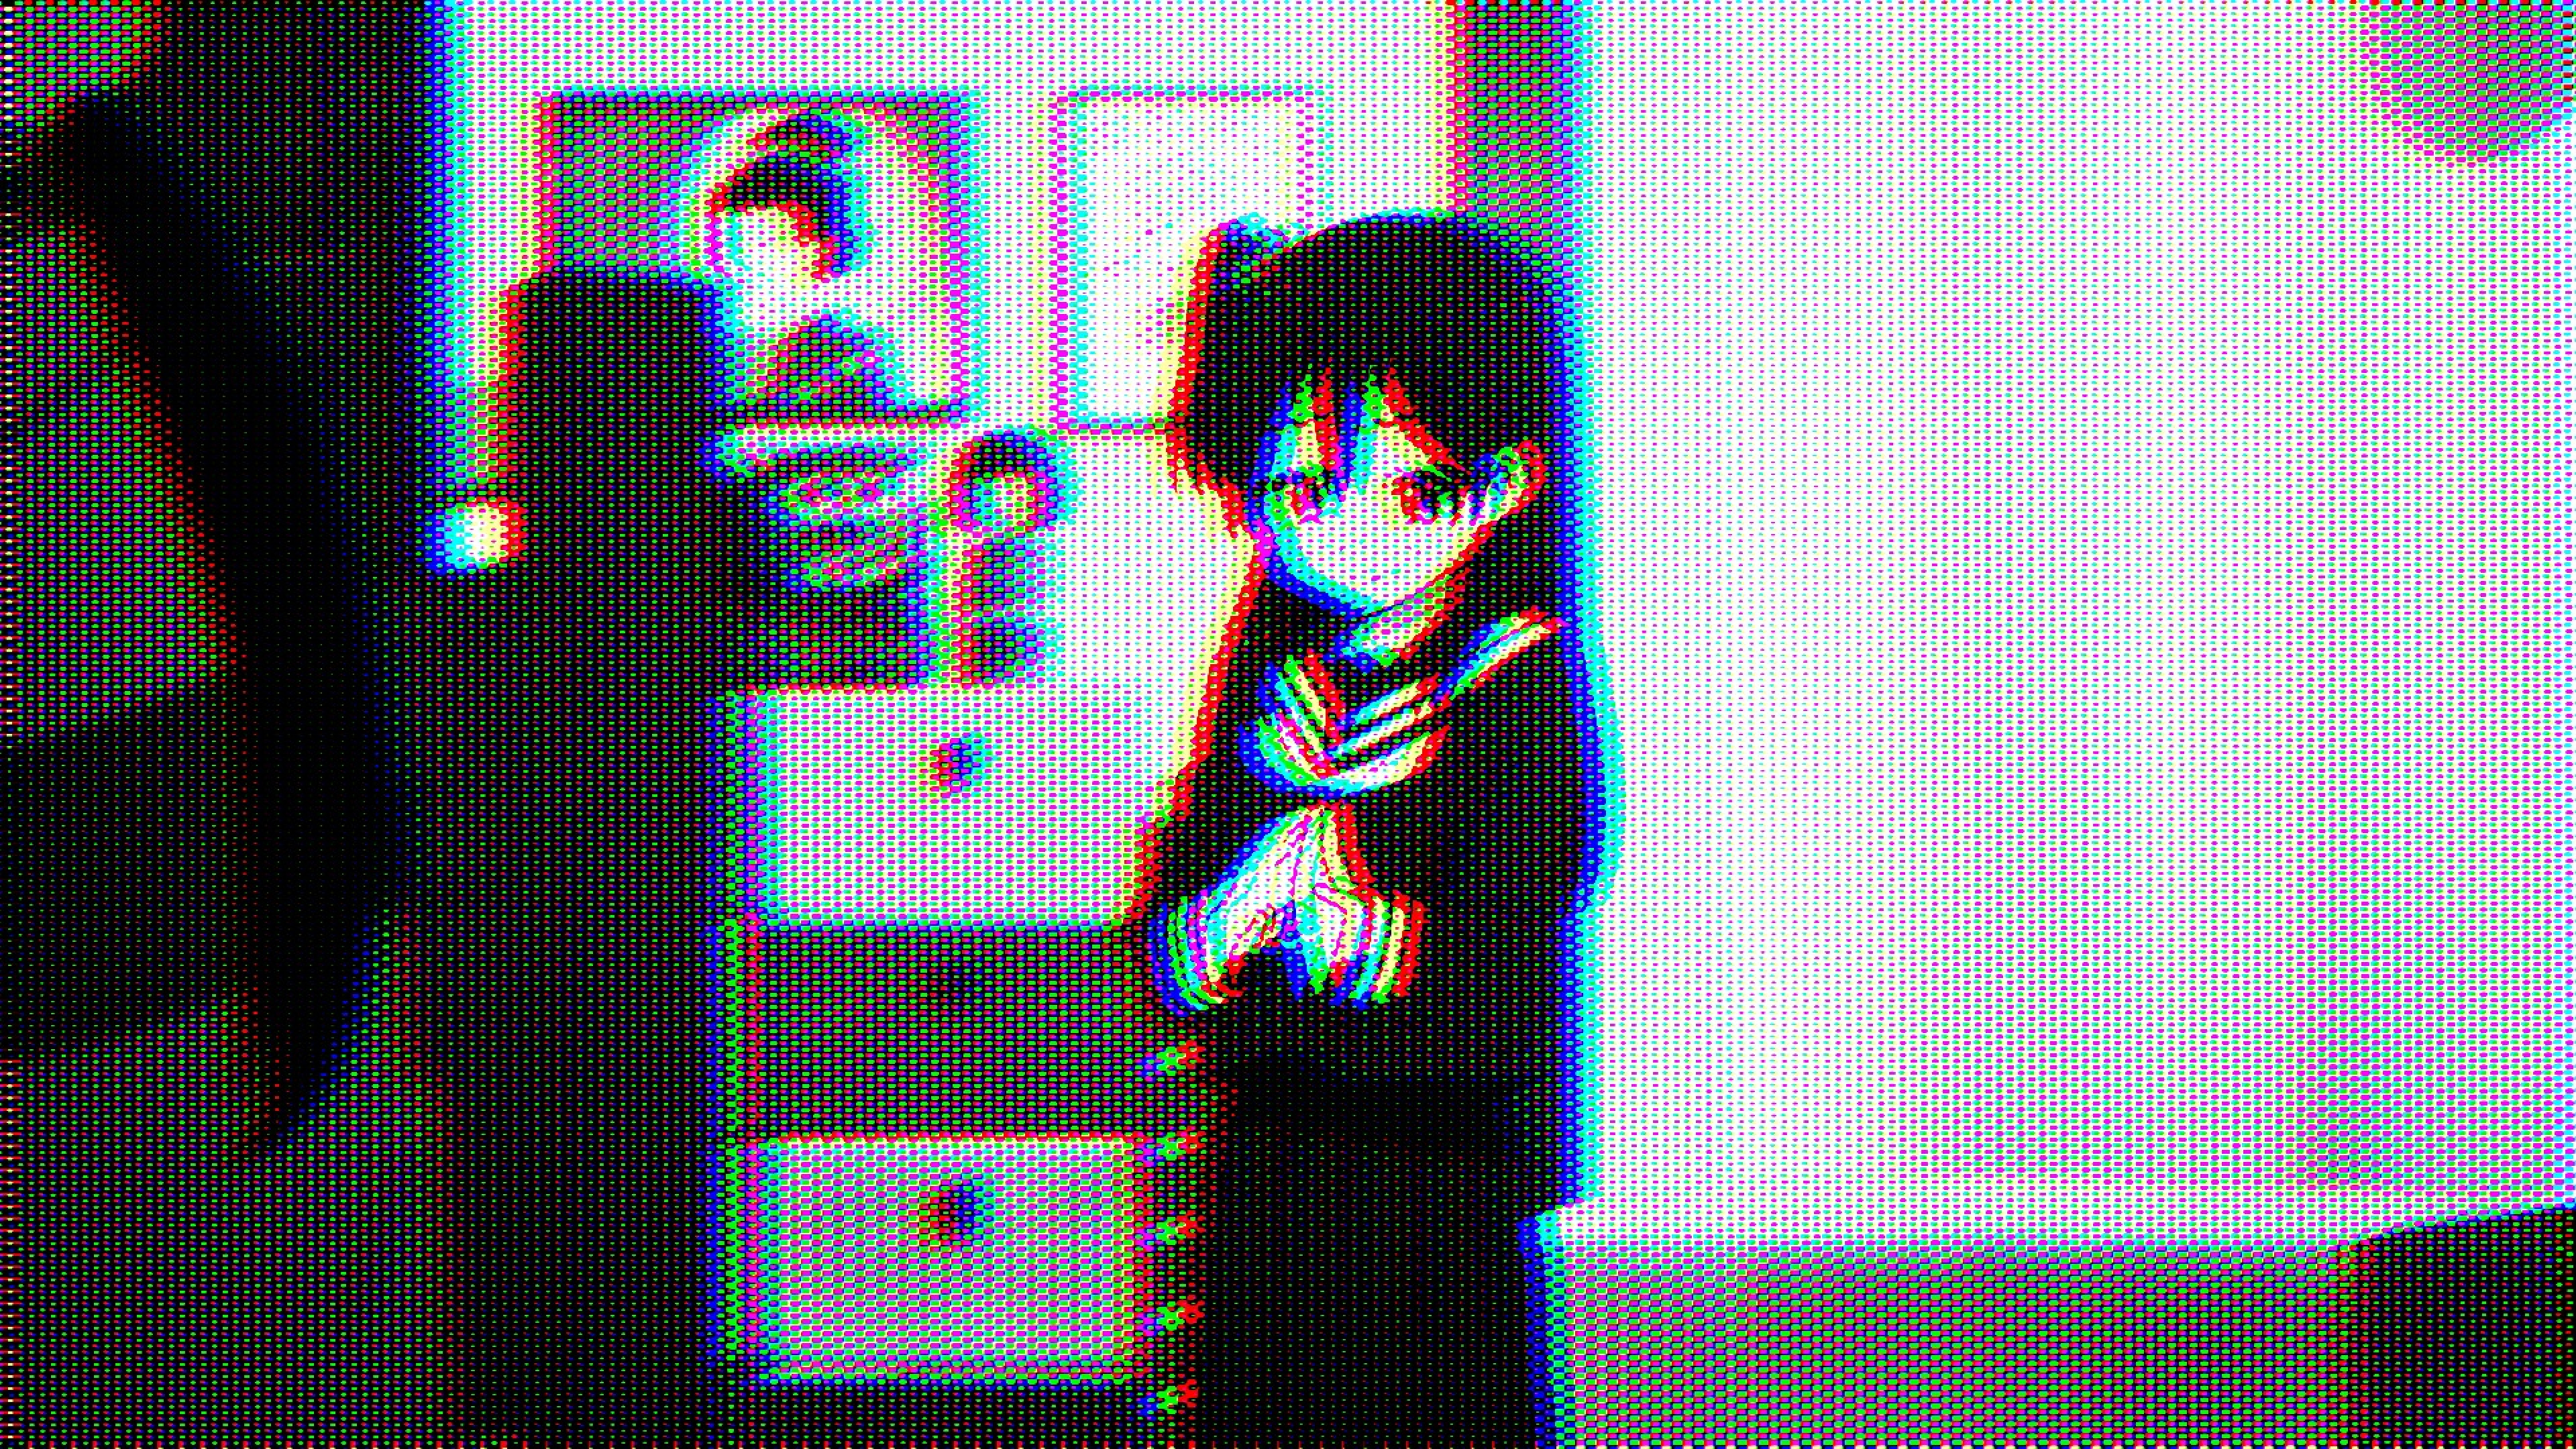 Anime Edgy Black Aesthetic Wallpapers